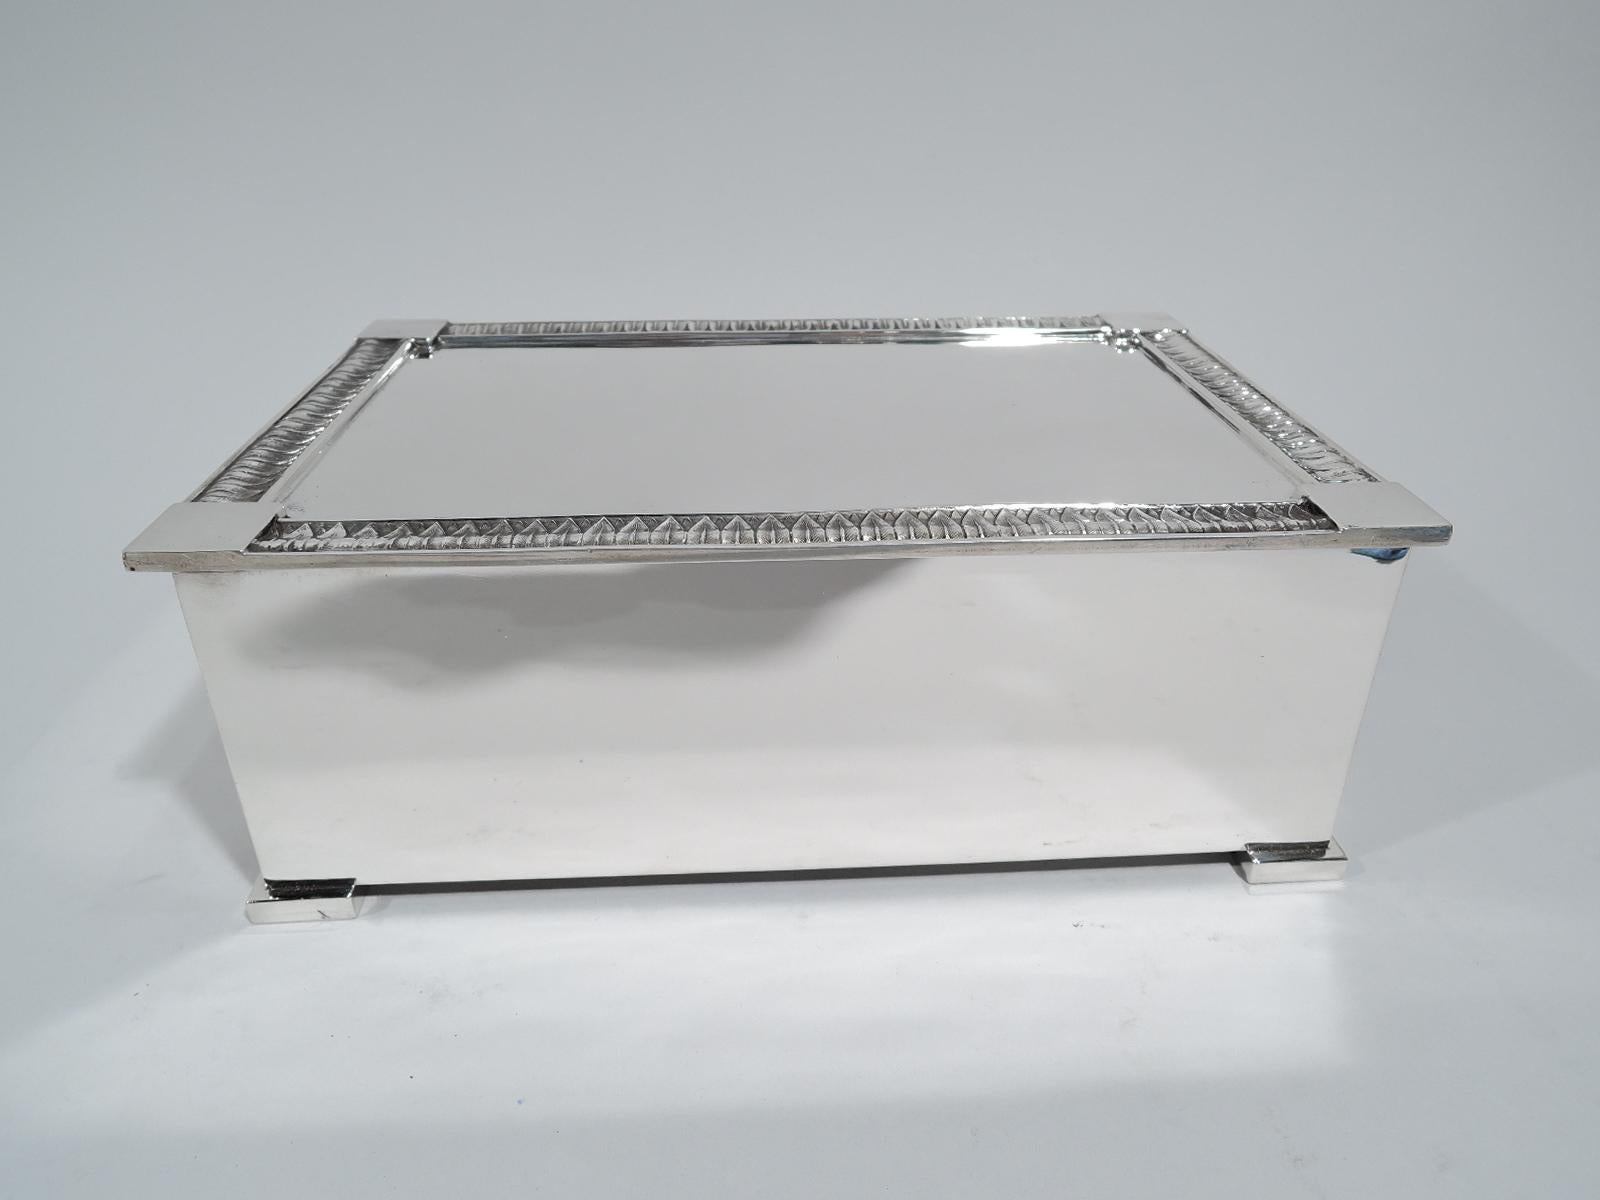 Modern classical sterling silver cigar box. Made by Tiffany & Co. in New York. Rectangular with straight sides and block supports. Cover flat, hinged, and overhanging with raised leaf-and-dart border and corner squares. Box interior cedar lined.